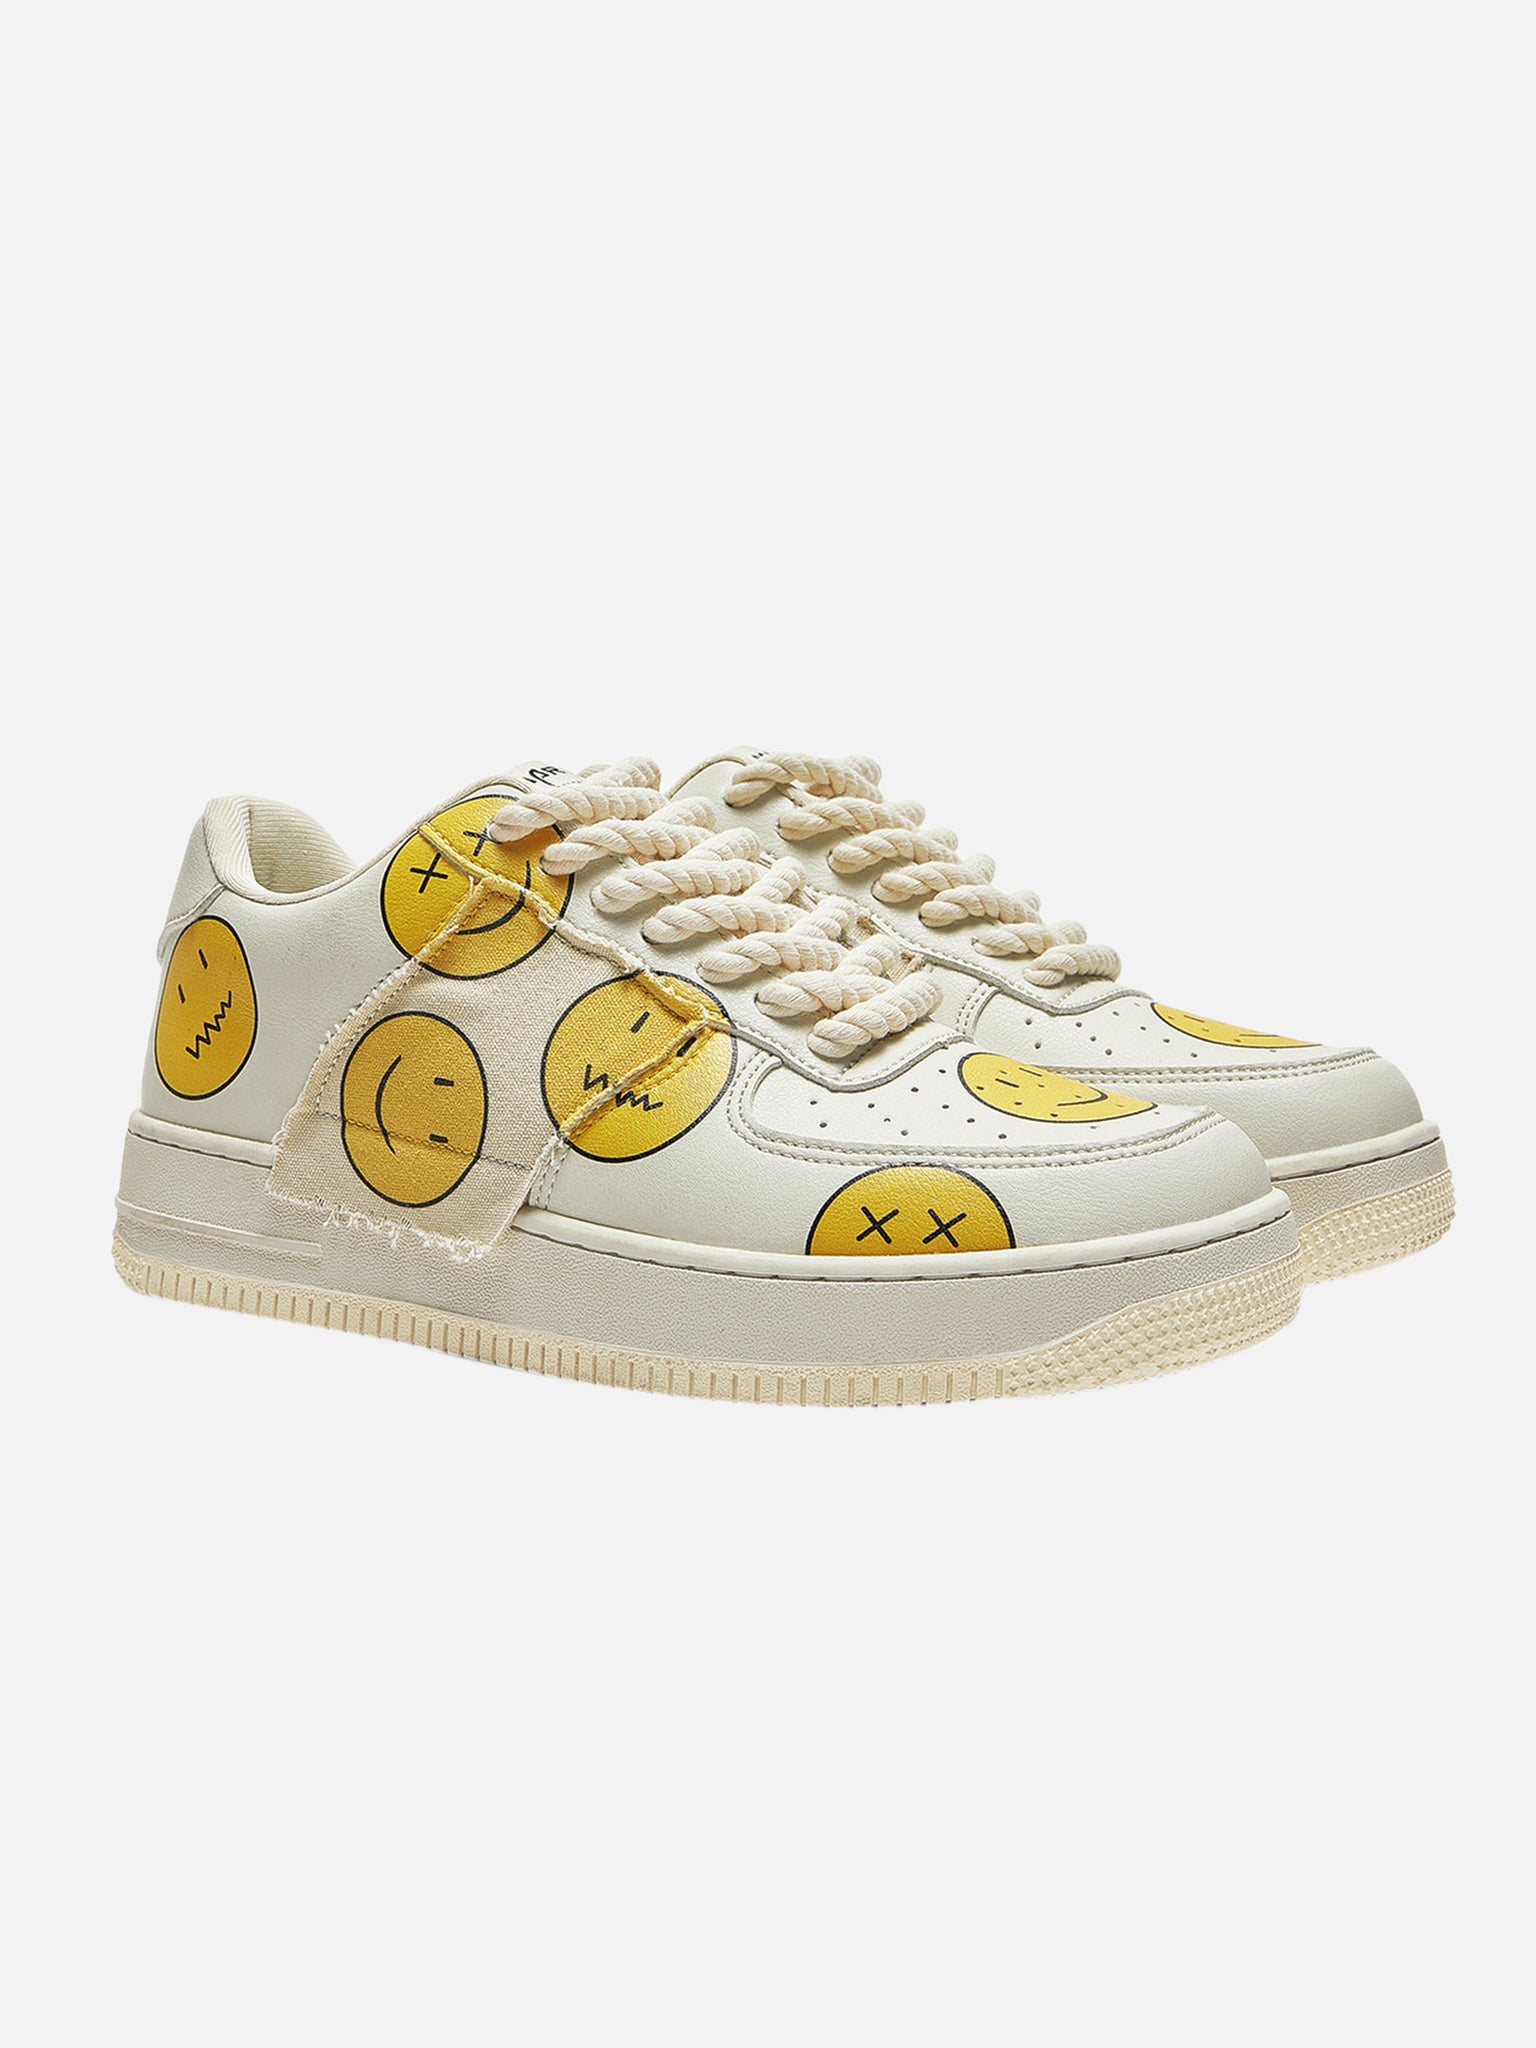 The Supermade American Fun Smiley Face Expression Board Shoes